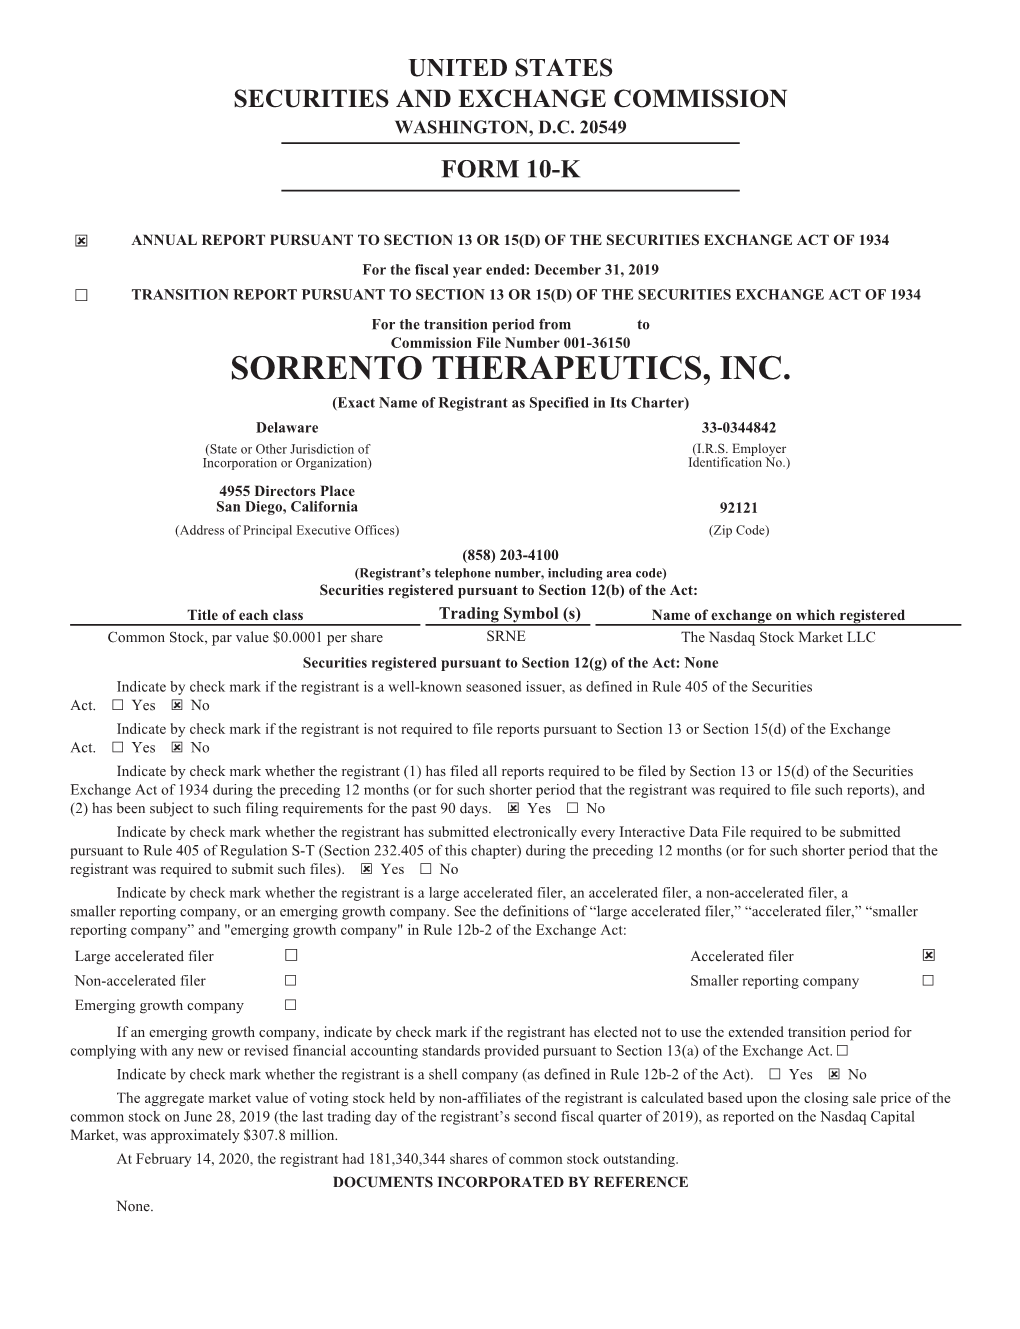 SORRENTO THERAPEUTICS, INC. (Exact Name of Registrant As Specified in Its Charter) Delaware 33-0344842 (State Or Other Jurisdiction of (I.R.S